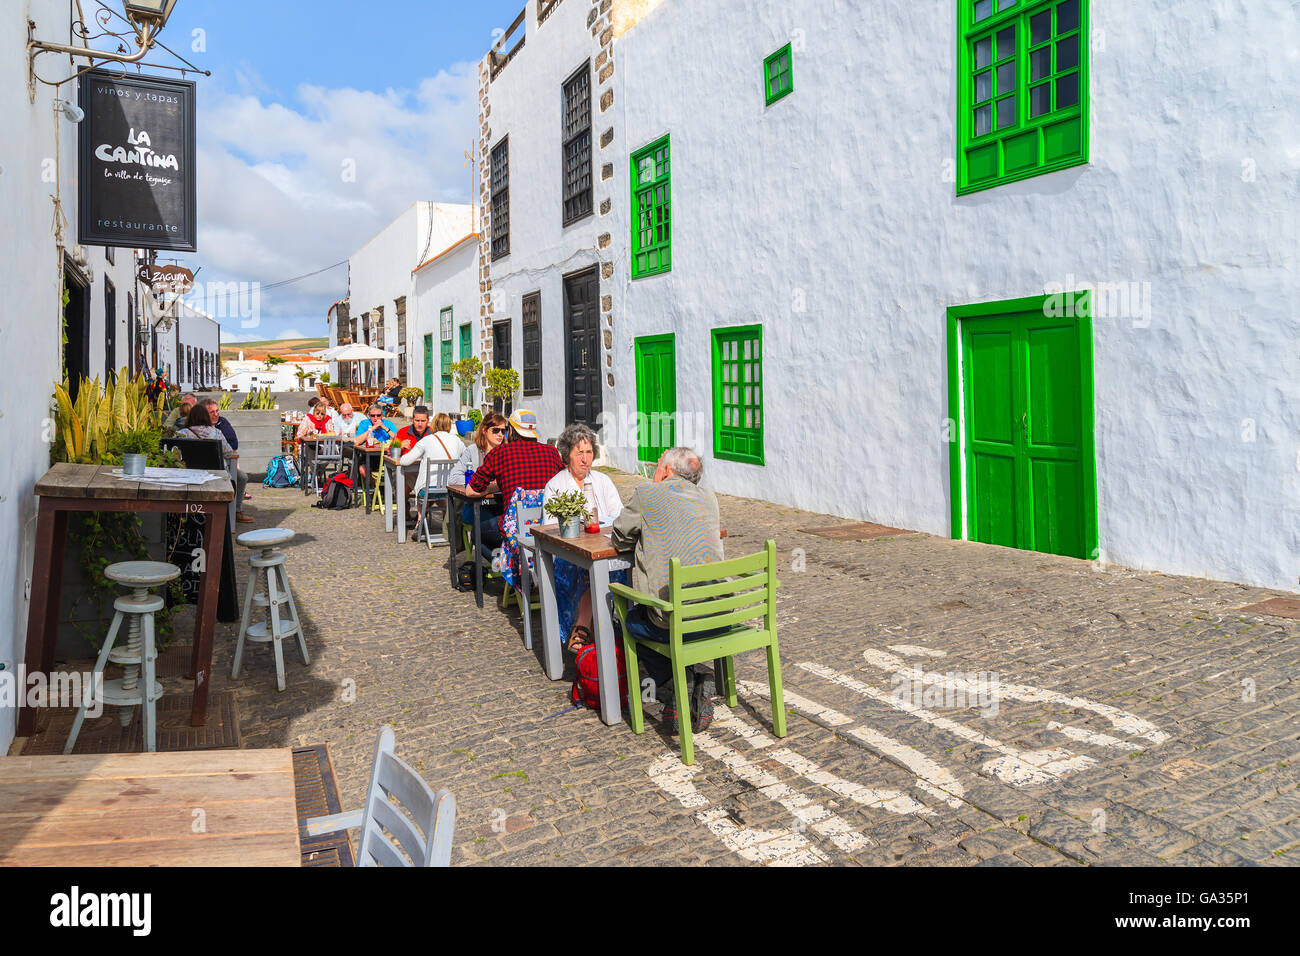 TEGUISE TOWN, LANZAROTE ISLAND - JAN 14, 2015: tourists sitting in local restaurant in old town of Teguise. This town is former capital of Lanzarote island and is very popular attraction to see. Stock Photo